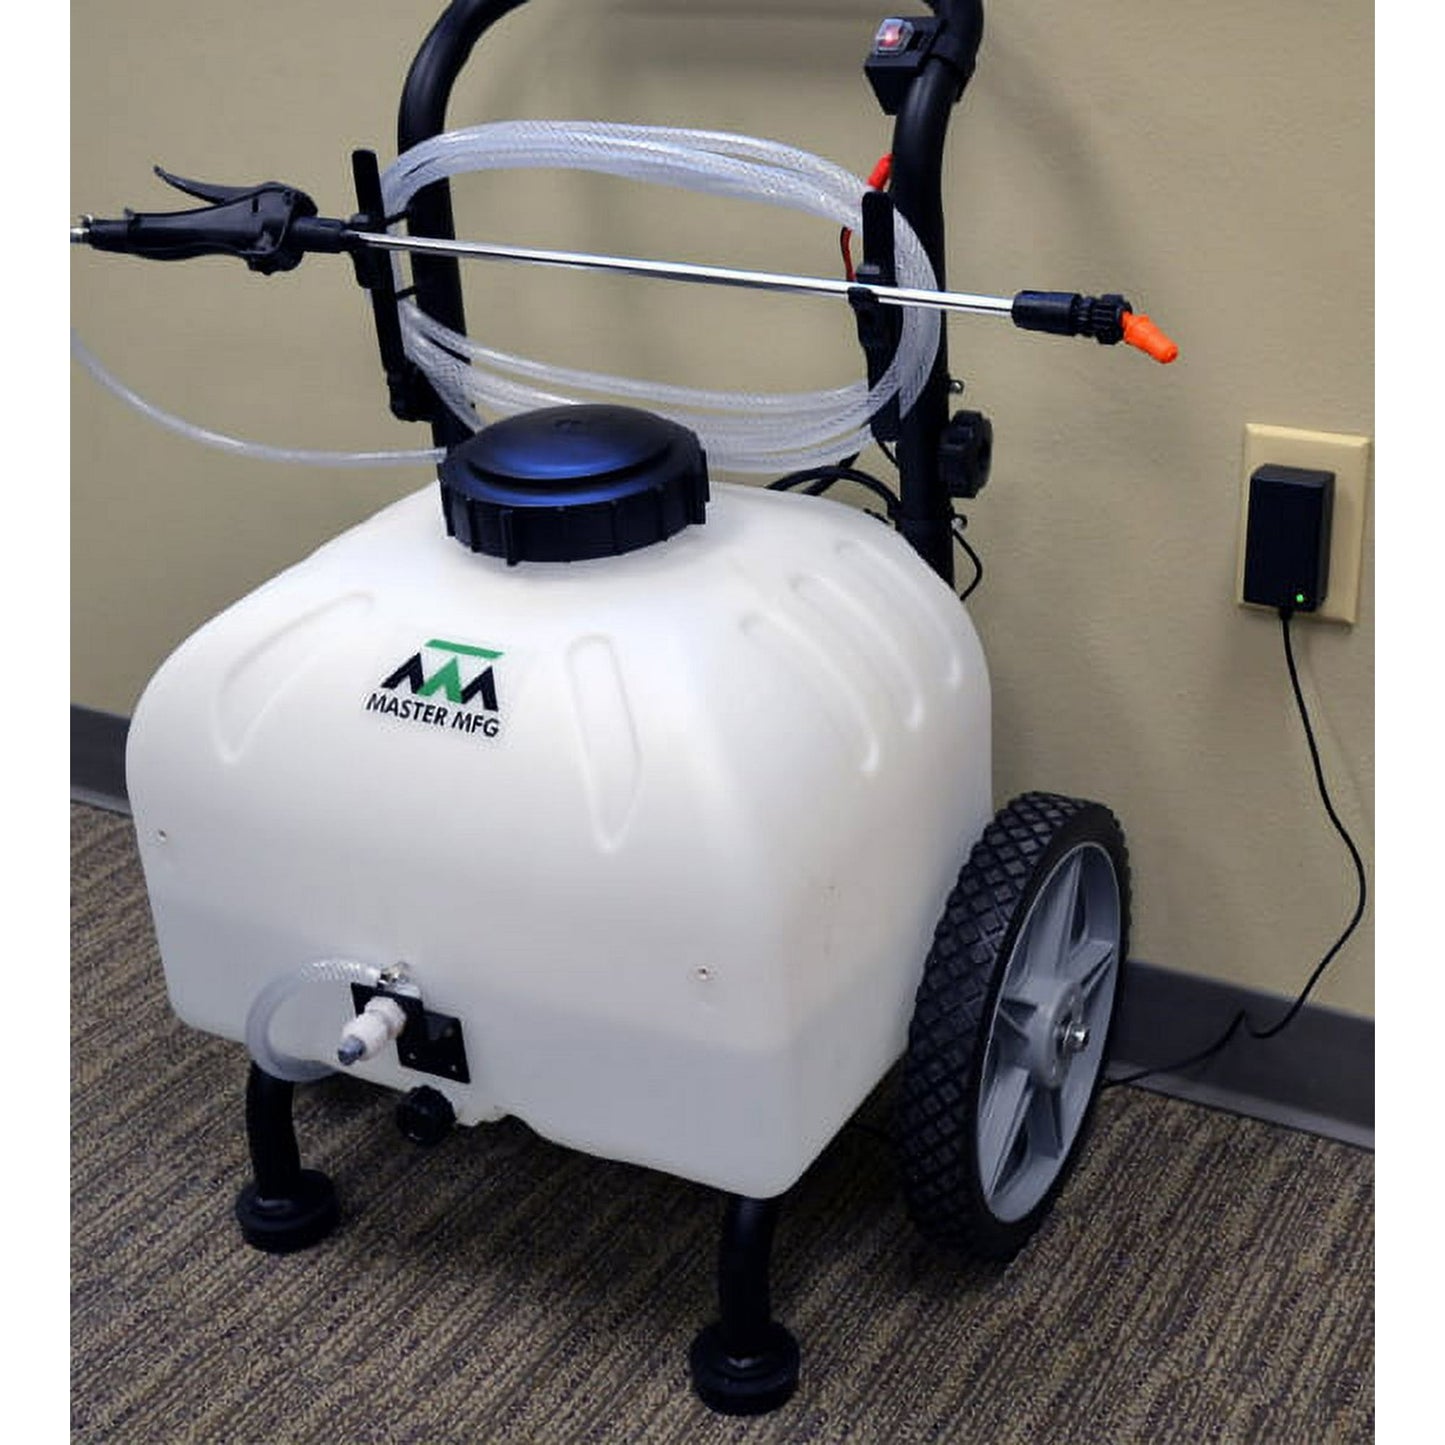 Master Mfg Lawn Sprayer, 9 Gal Tank Capacity, 12V Rechargeable Battery, 50in Coverage, Ideal for Insecticides & Herbicides, Height 24", Dia. 19"